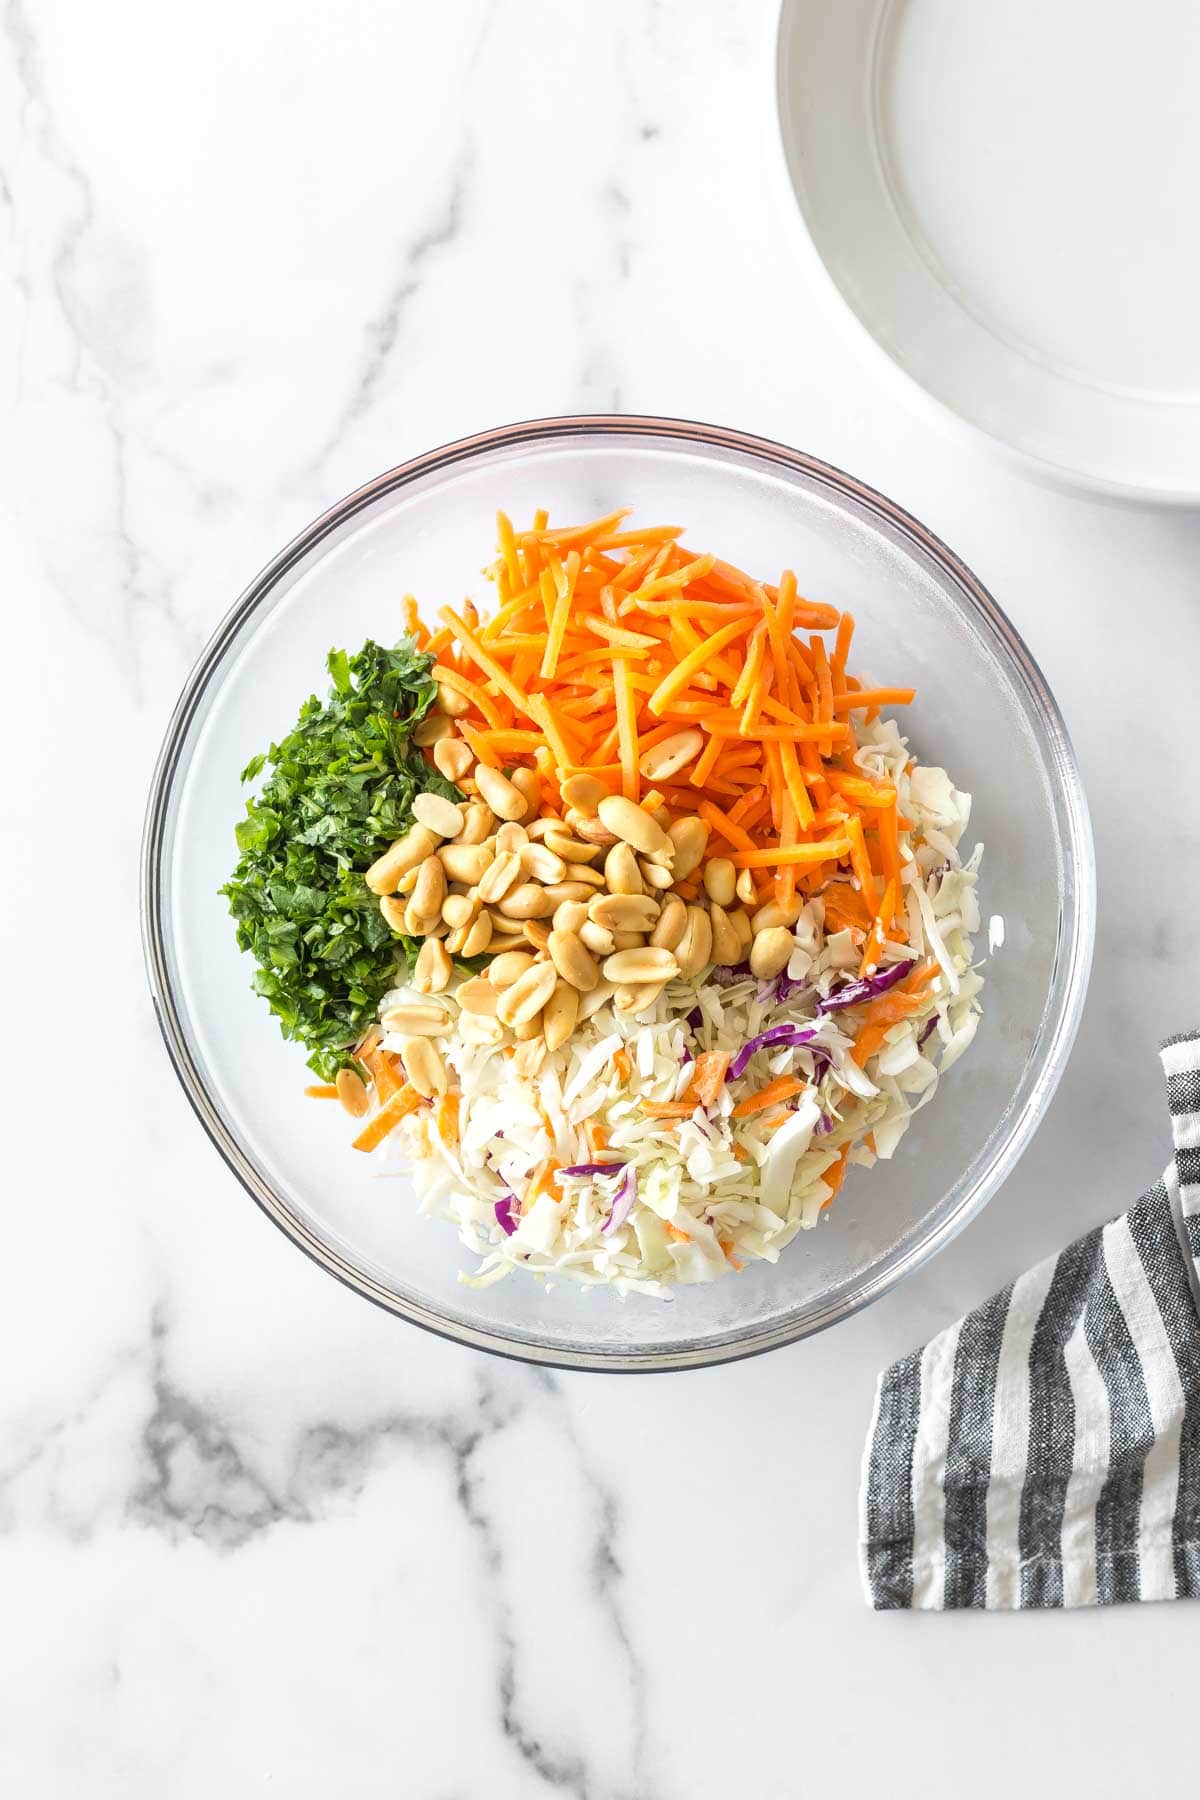 ingredients for asian chicken wrap recipe in a large glass bowl: shredded coleslaw, carrots, cilantro and peanuts